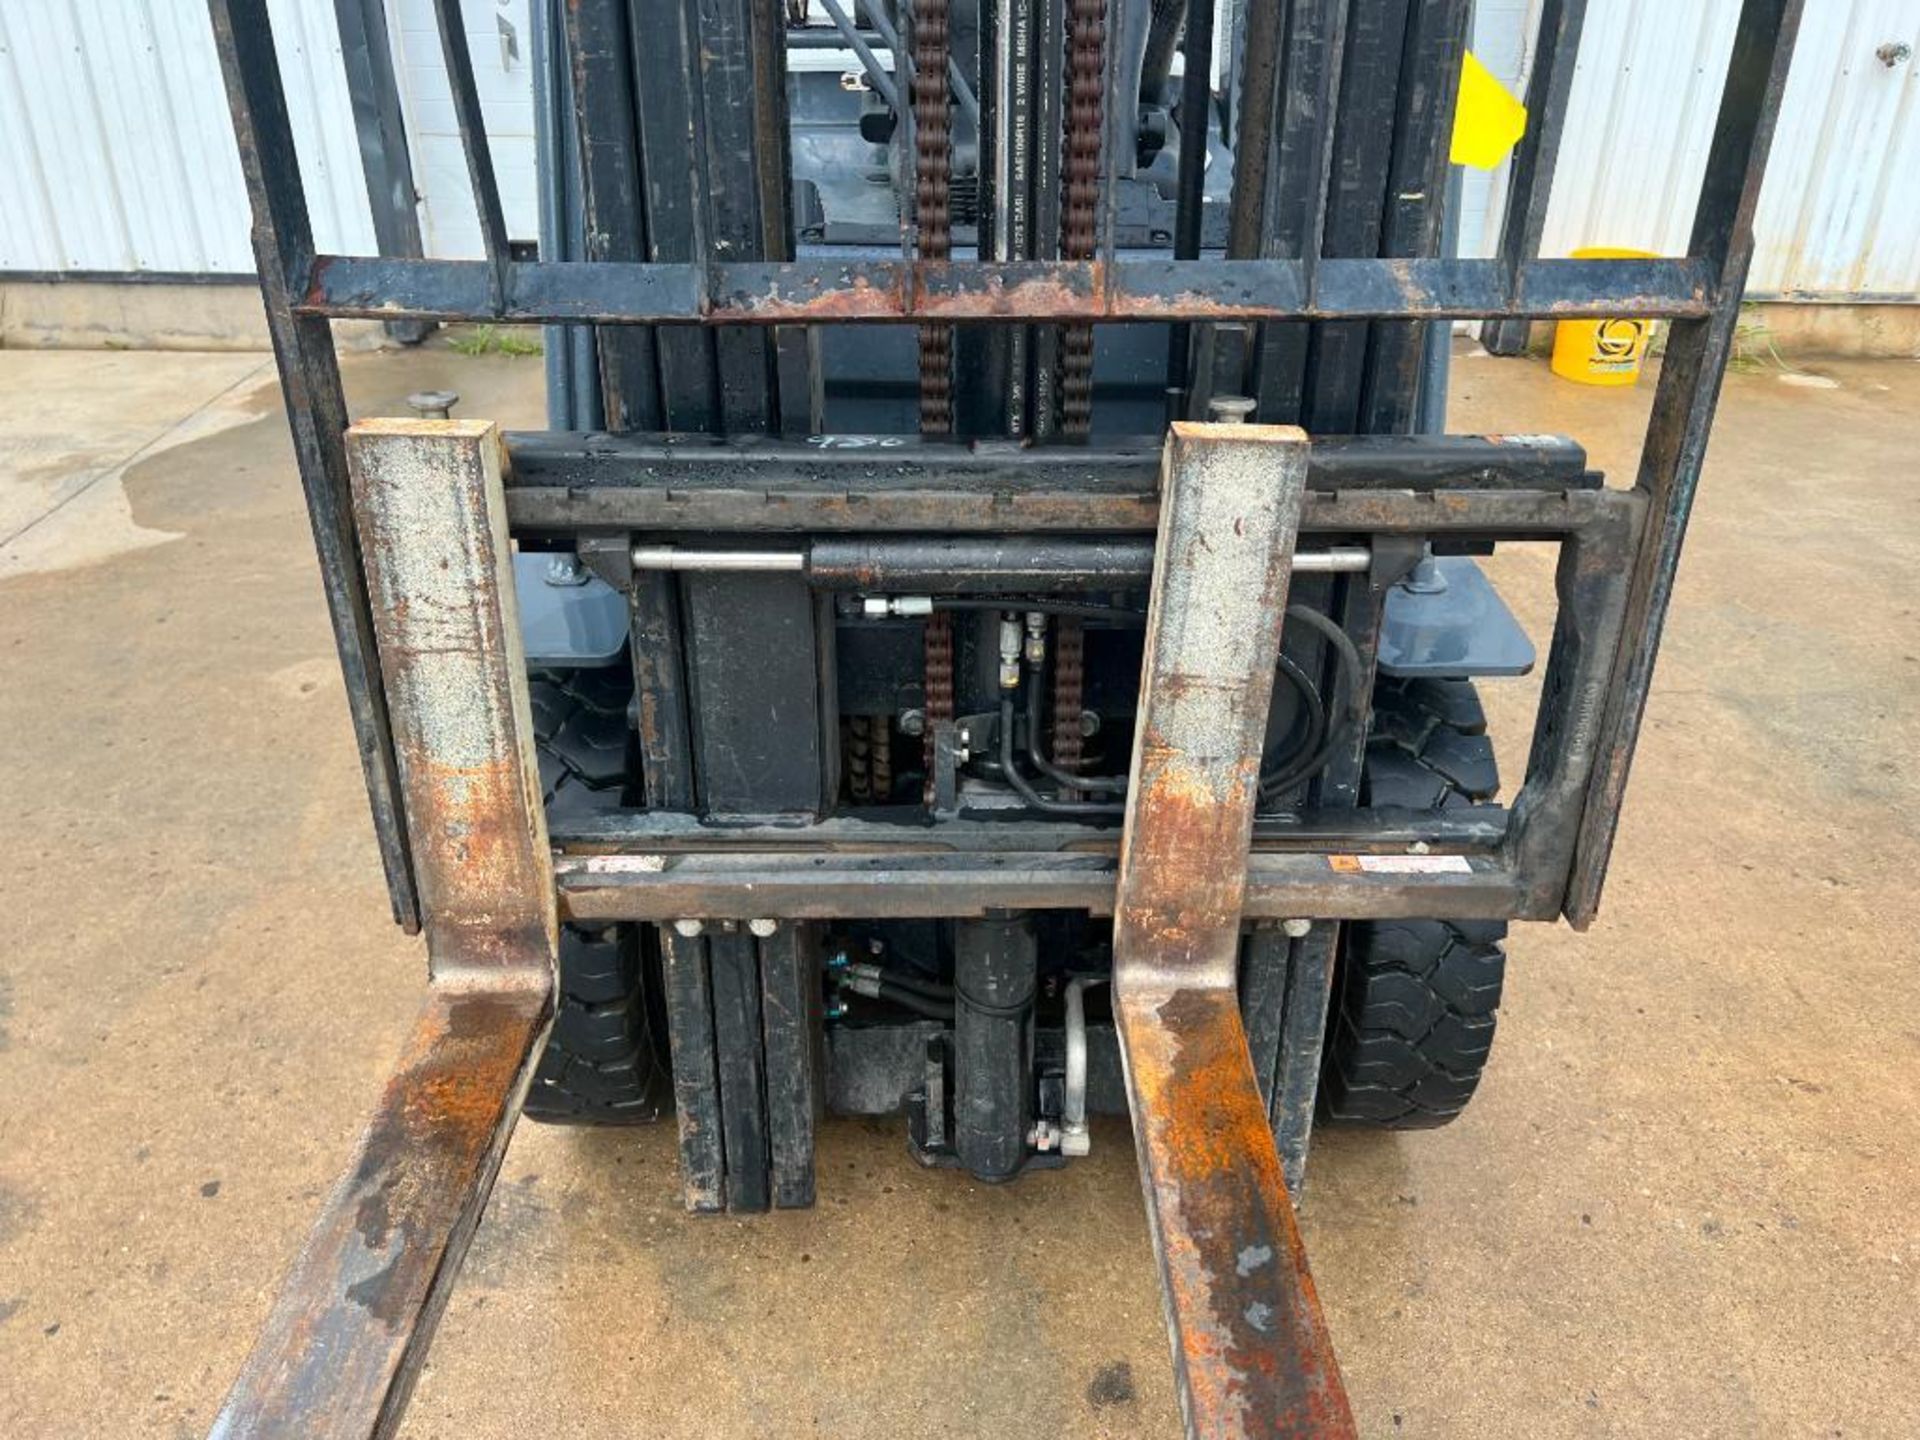 Toyota Forklift Truck, Model 8FGU25, Hours 5,264, LP. Located in Altamont, IL - Image 10 of 19